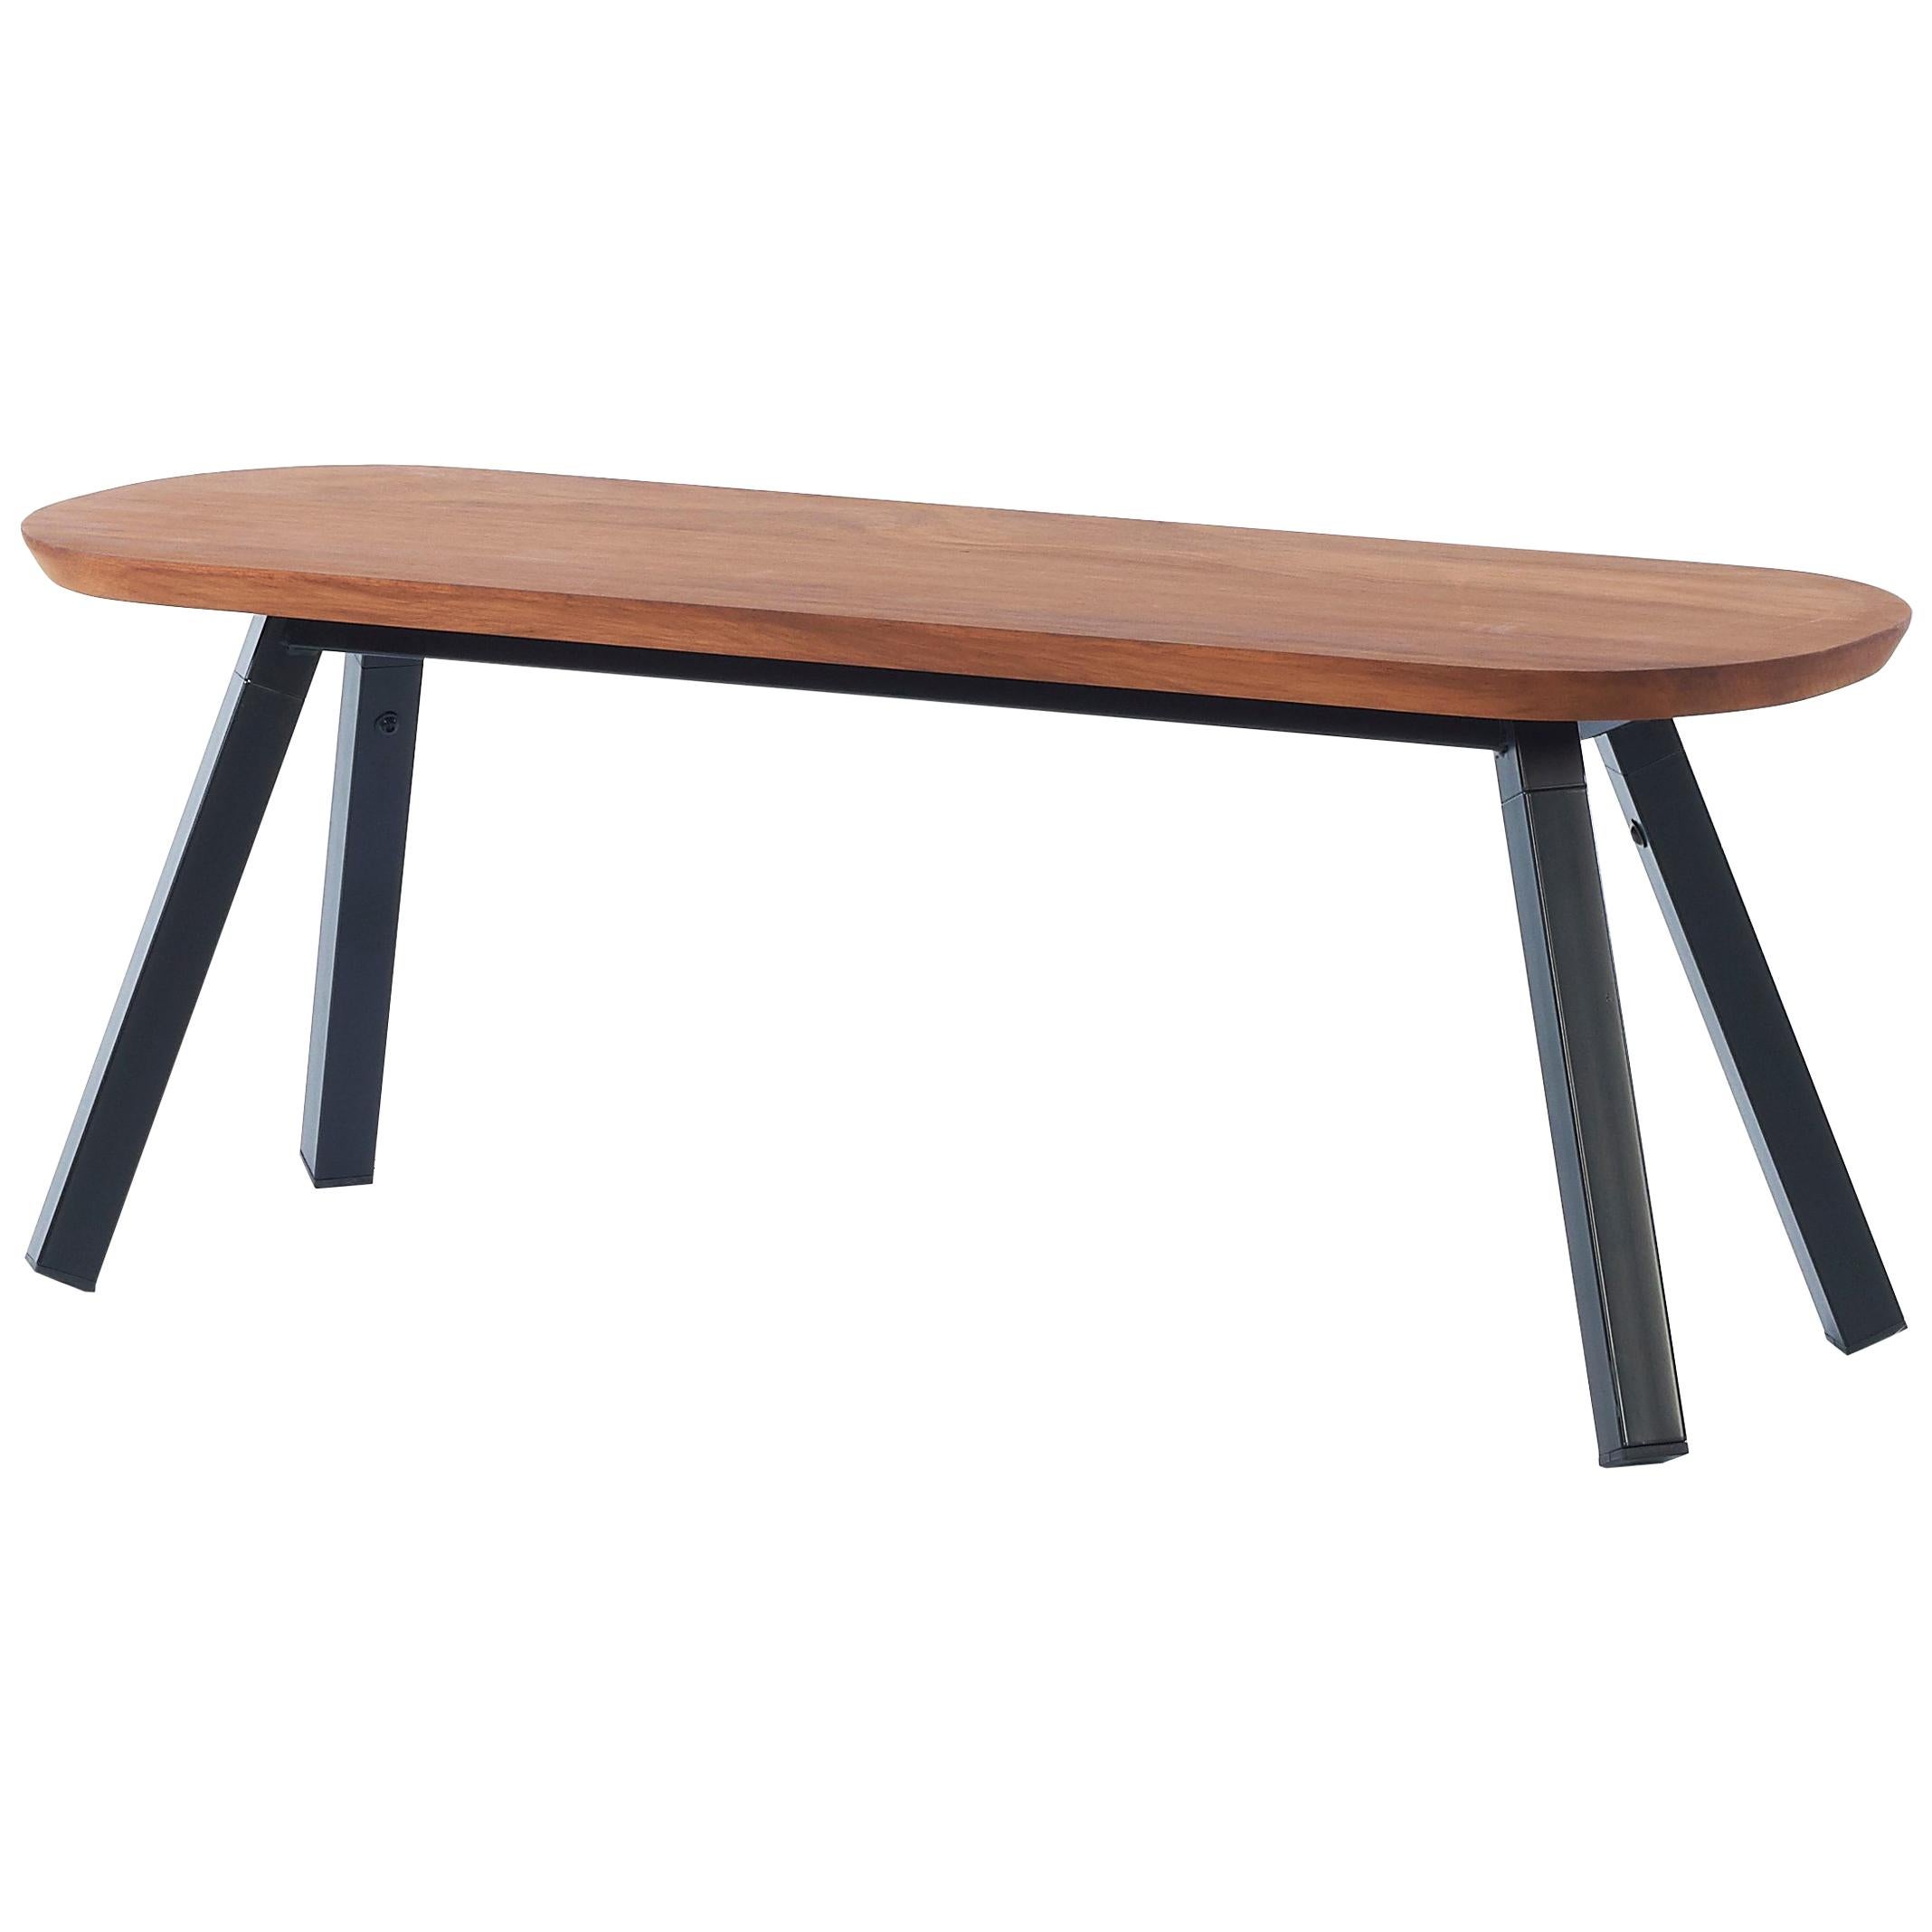 RS Barcelona You & Me 120 Bench in Iroko with Black Legs by A.P.O. For Sale